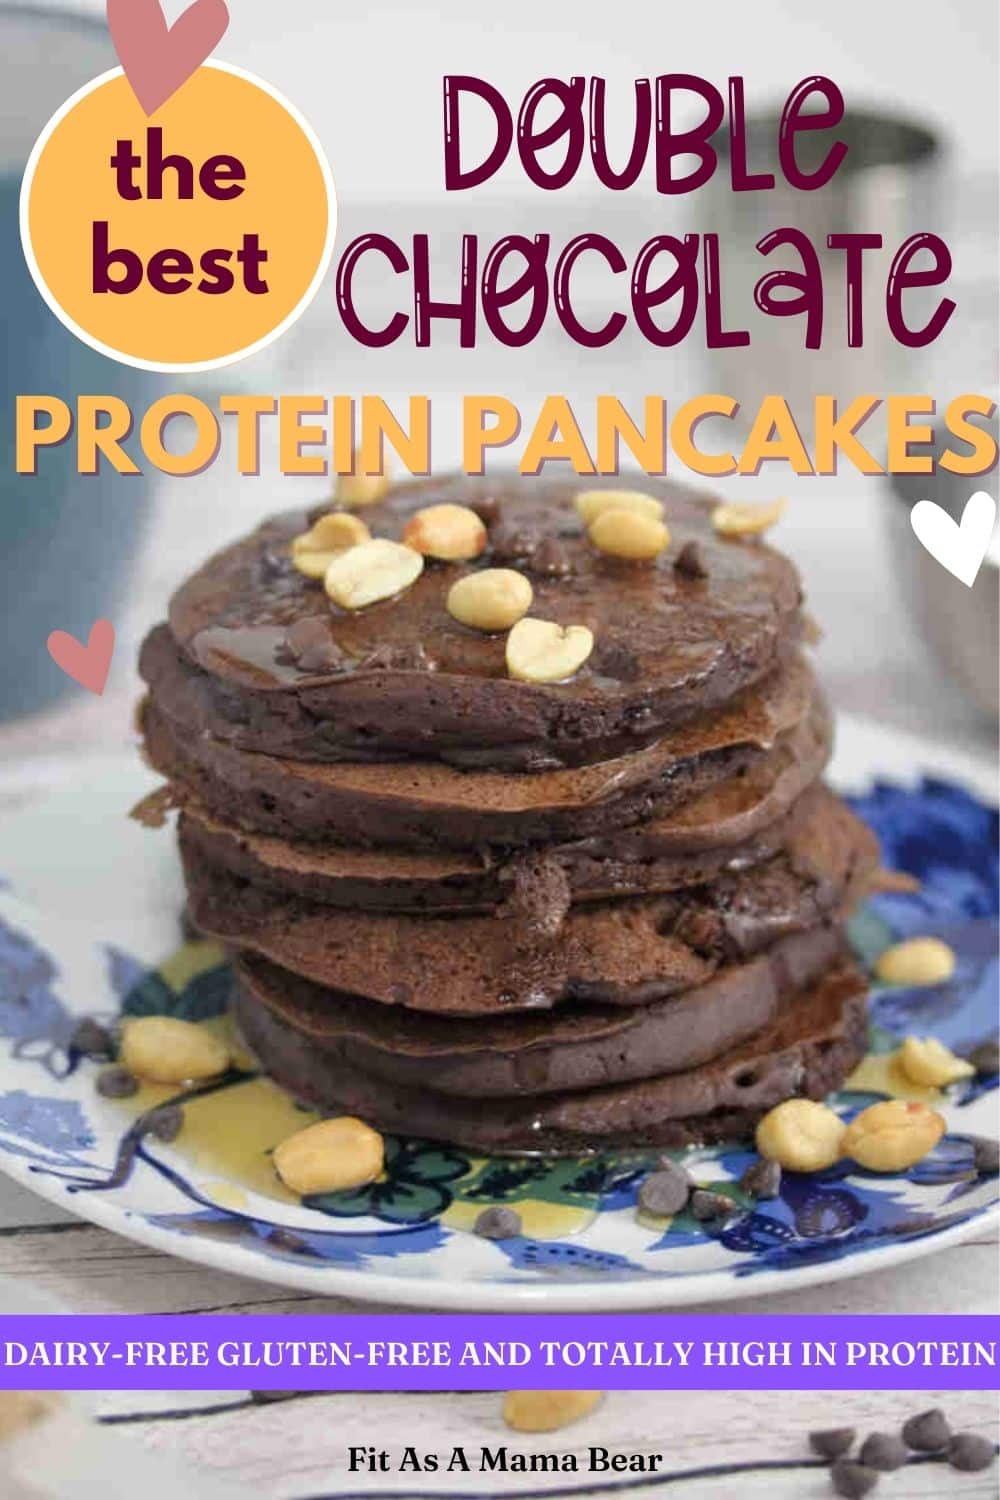 Blue and white plate with chocolate protein pancakes topped with peanuts with a coffee mug and silver bowl behind them and text on top of the image.